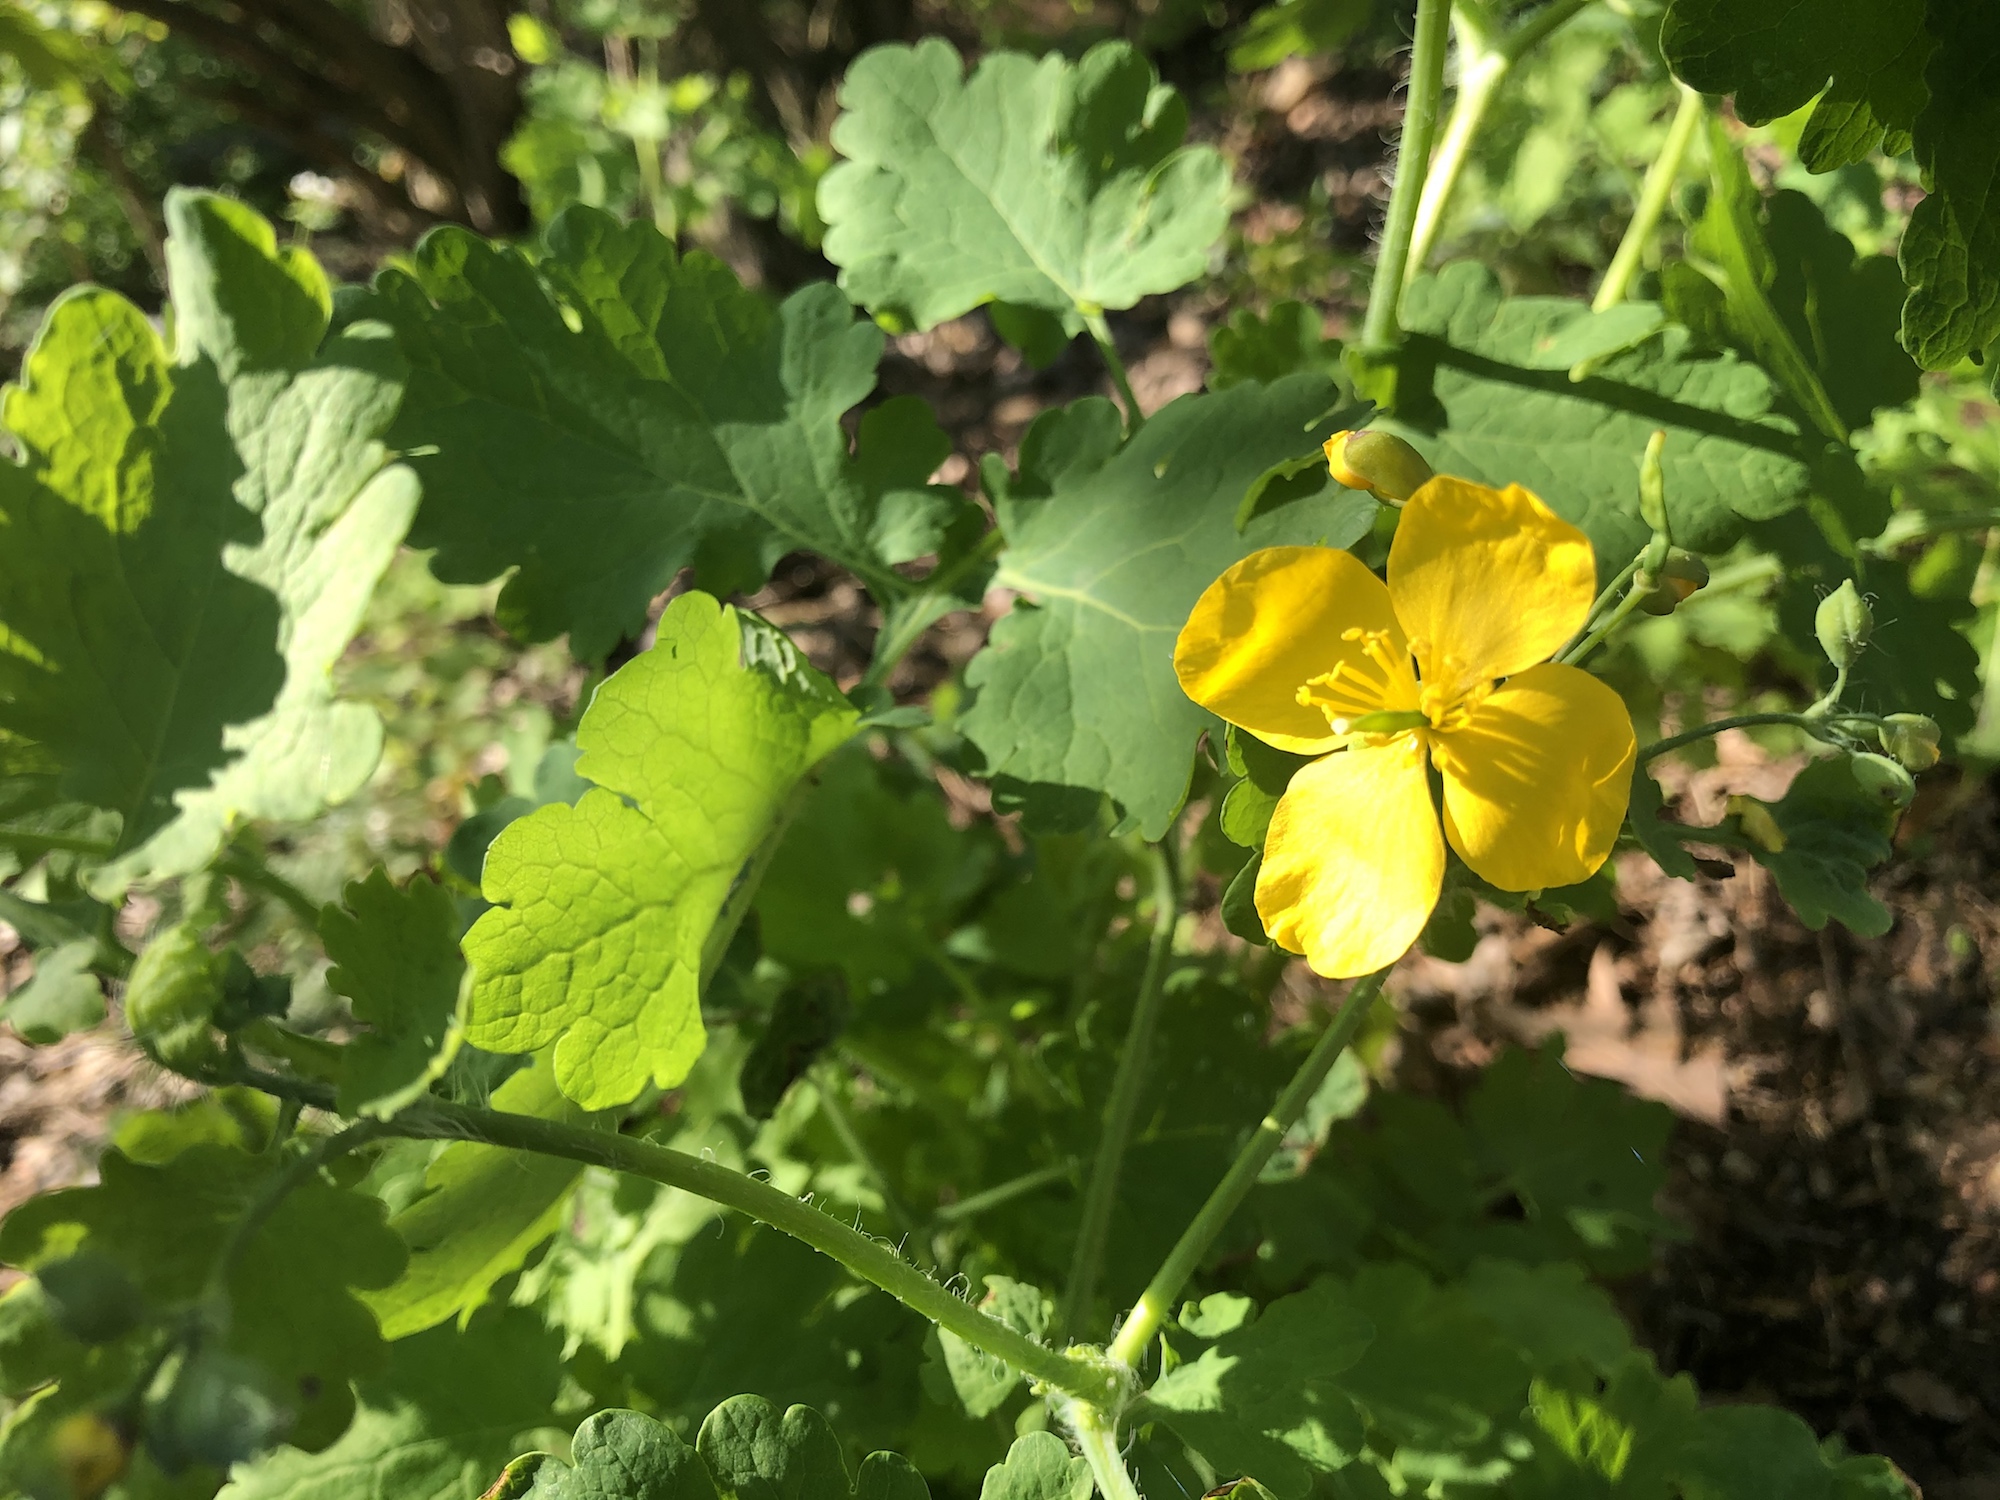 Greater Celandine by Duck Pond in Madison, Wisconsin on May 20, 2020.